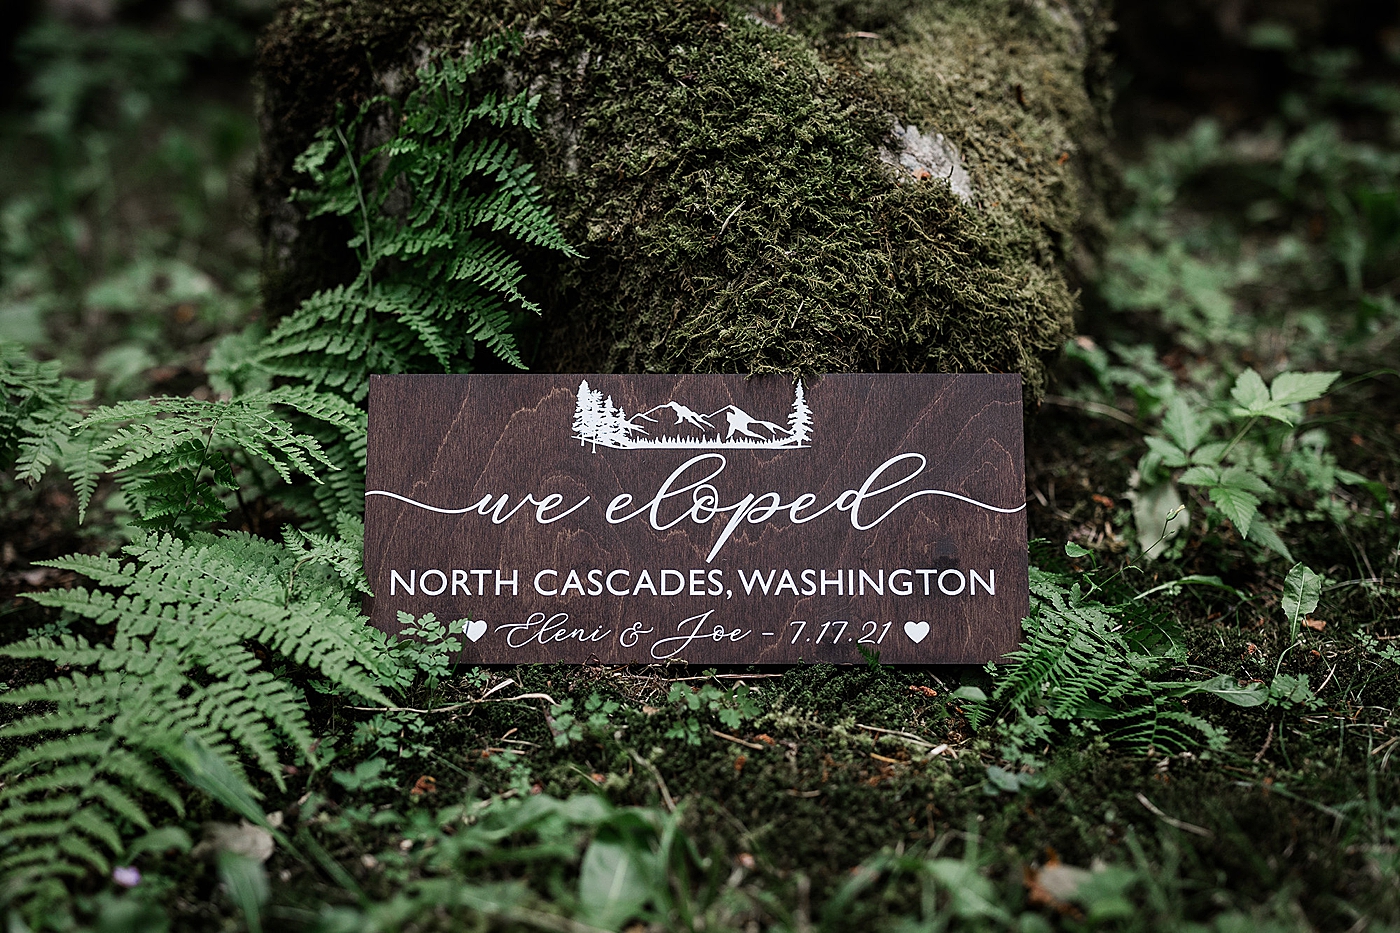 Personalize sign for North Cascades elopement. Photo by Megan Montalvo Photography.